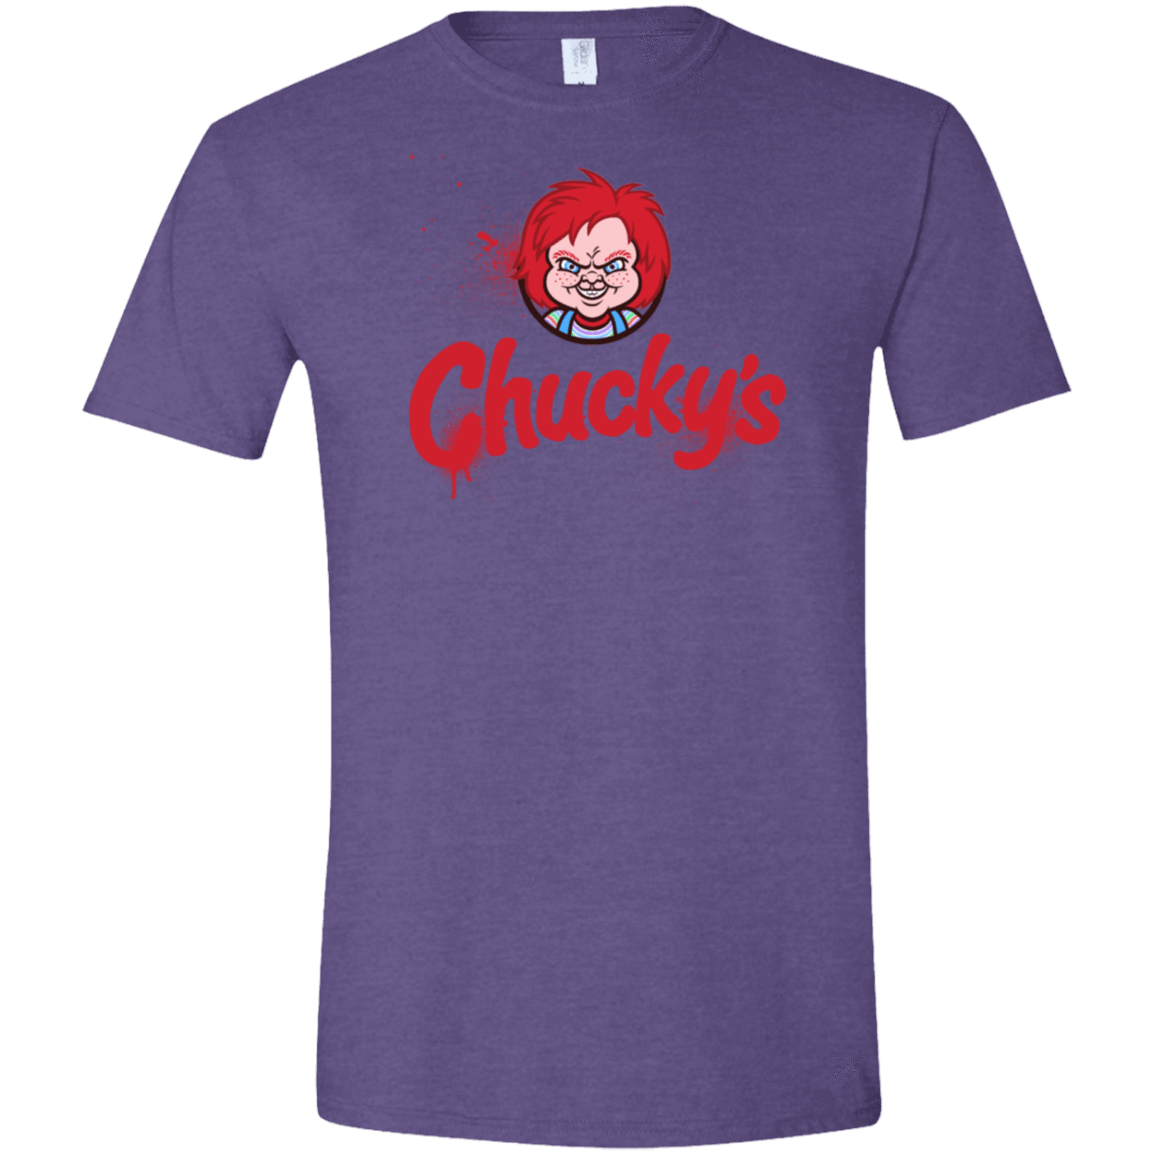 T-Shirts Heather Purple / S Chuckys Logo Men's Semi-Fitted Softstyle